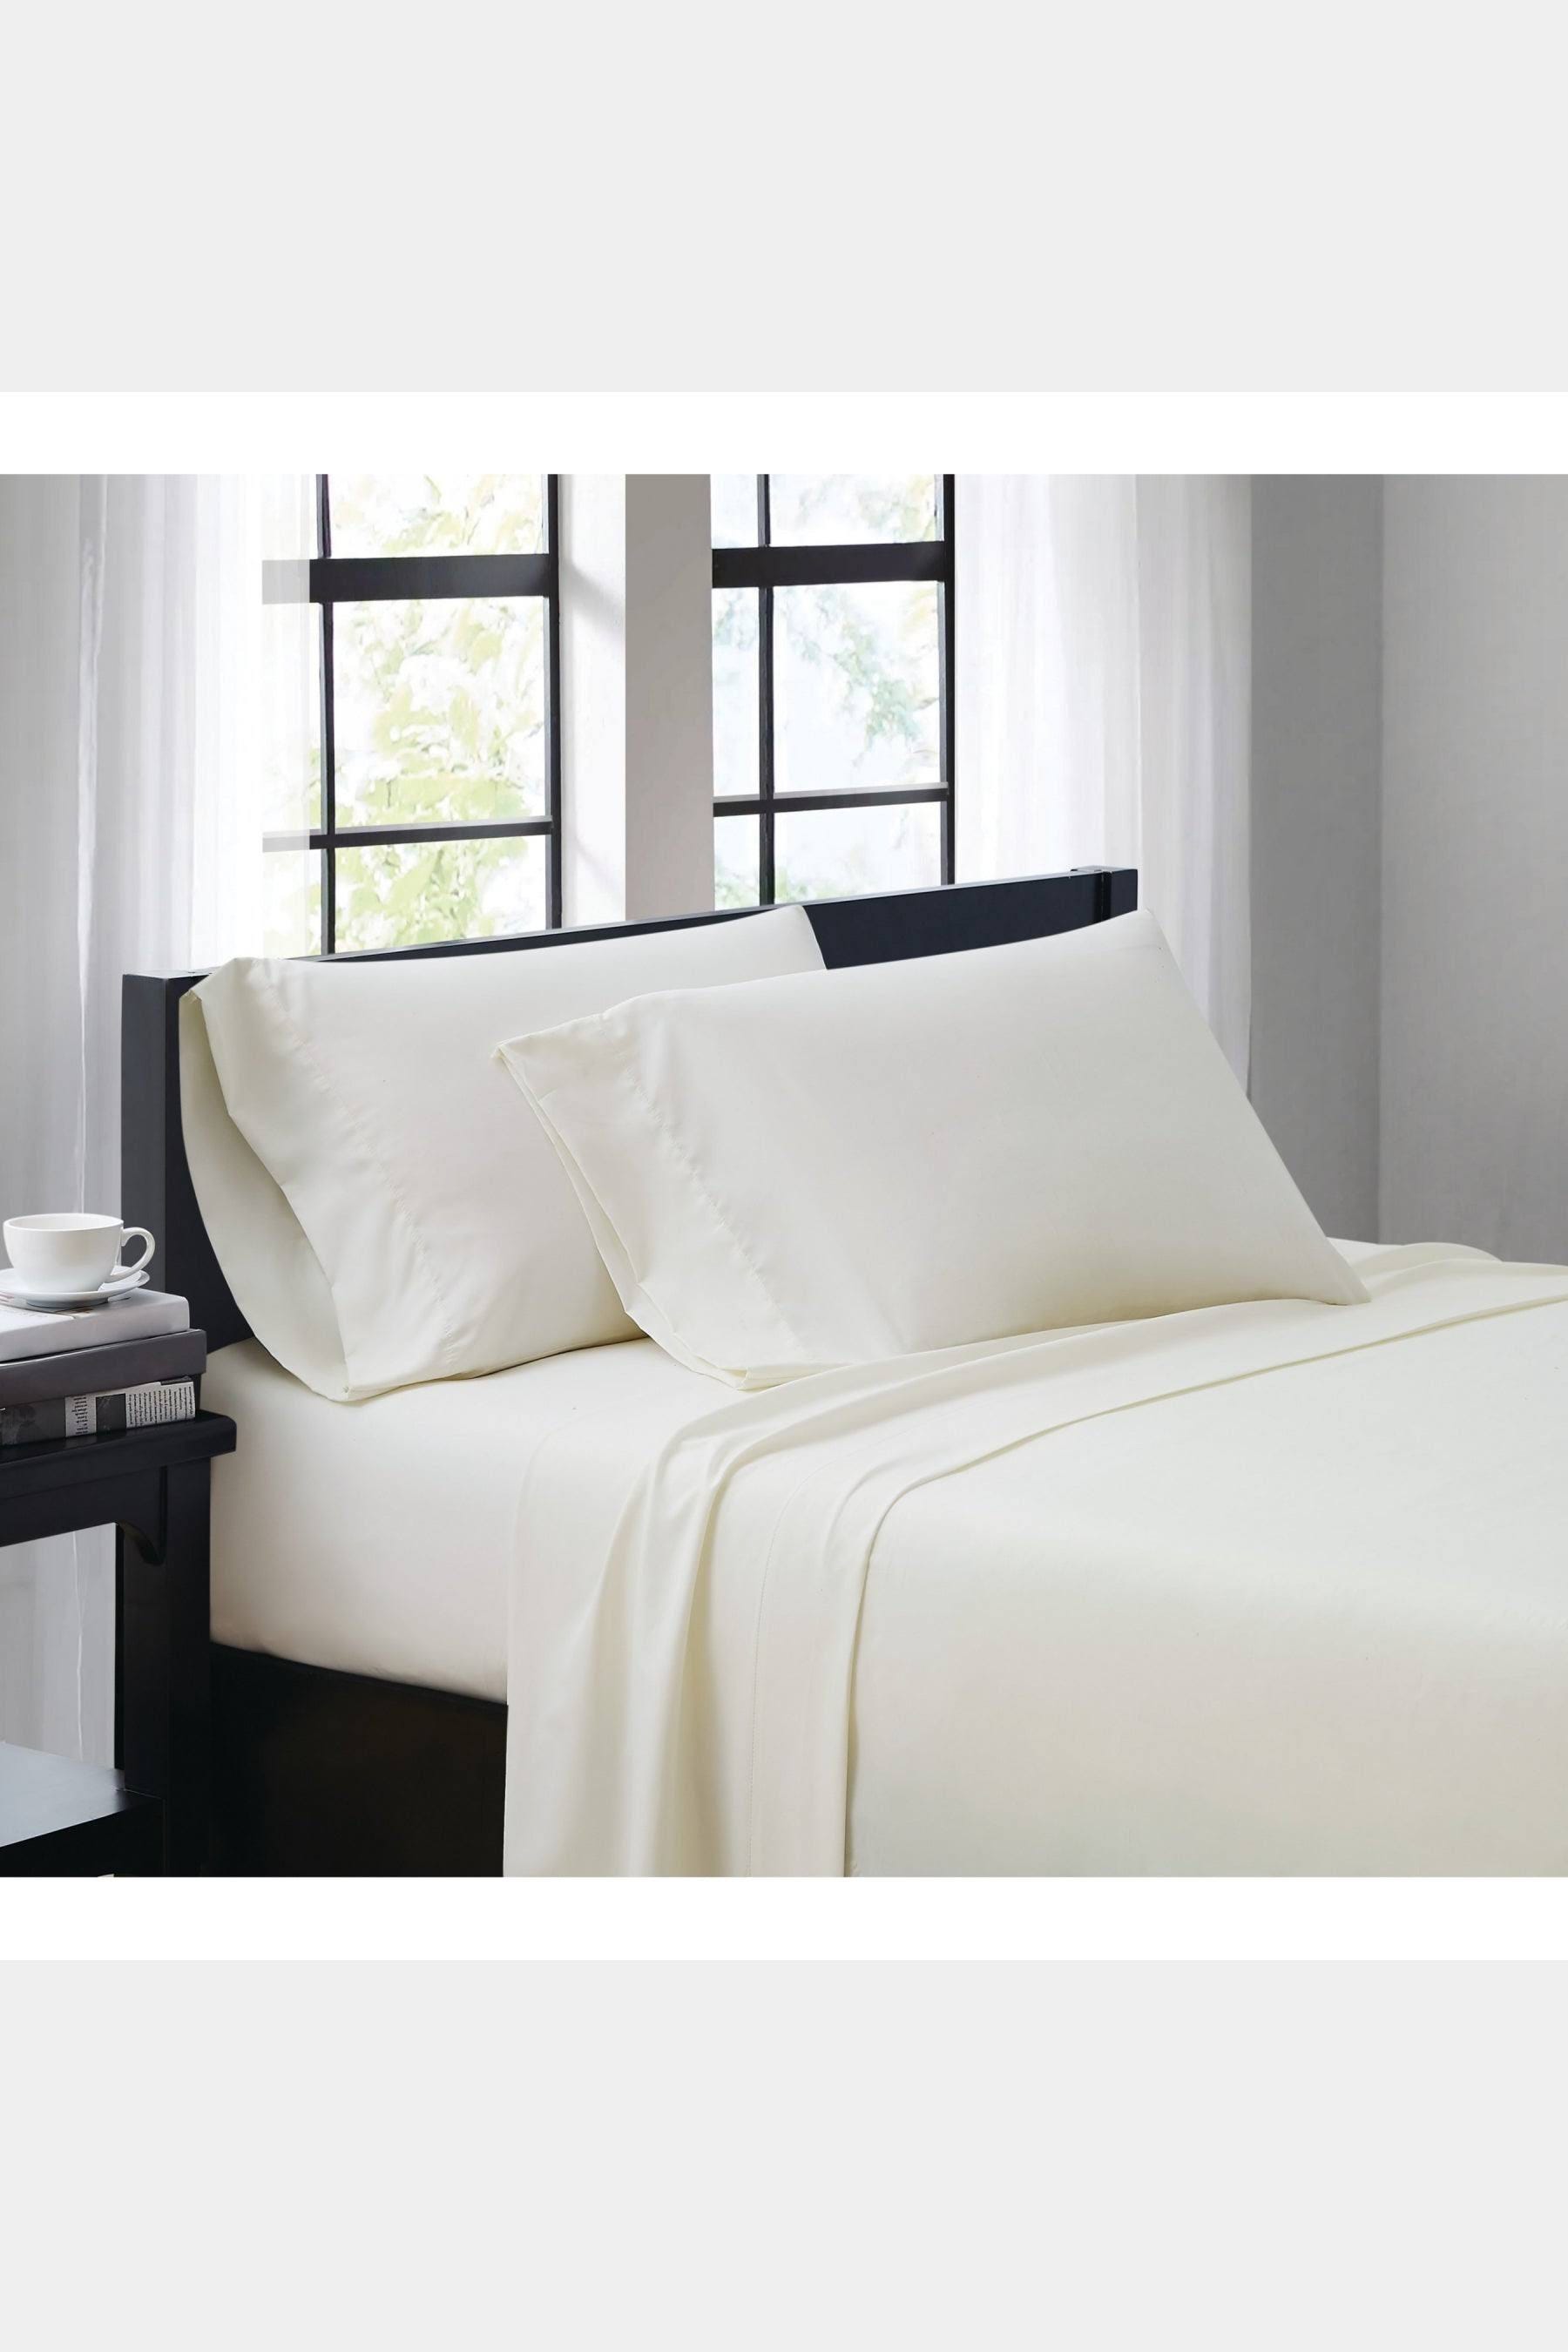 Truly Soft Everyday Grey King Sheet Set - Luxurious 100% Microfiber for Ultimate Comfort | Image